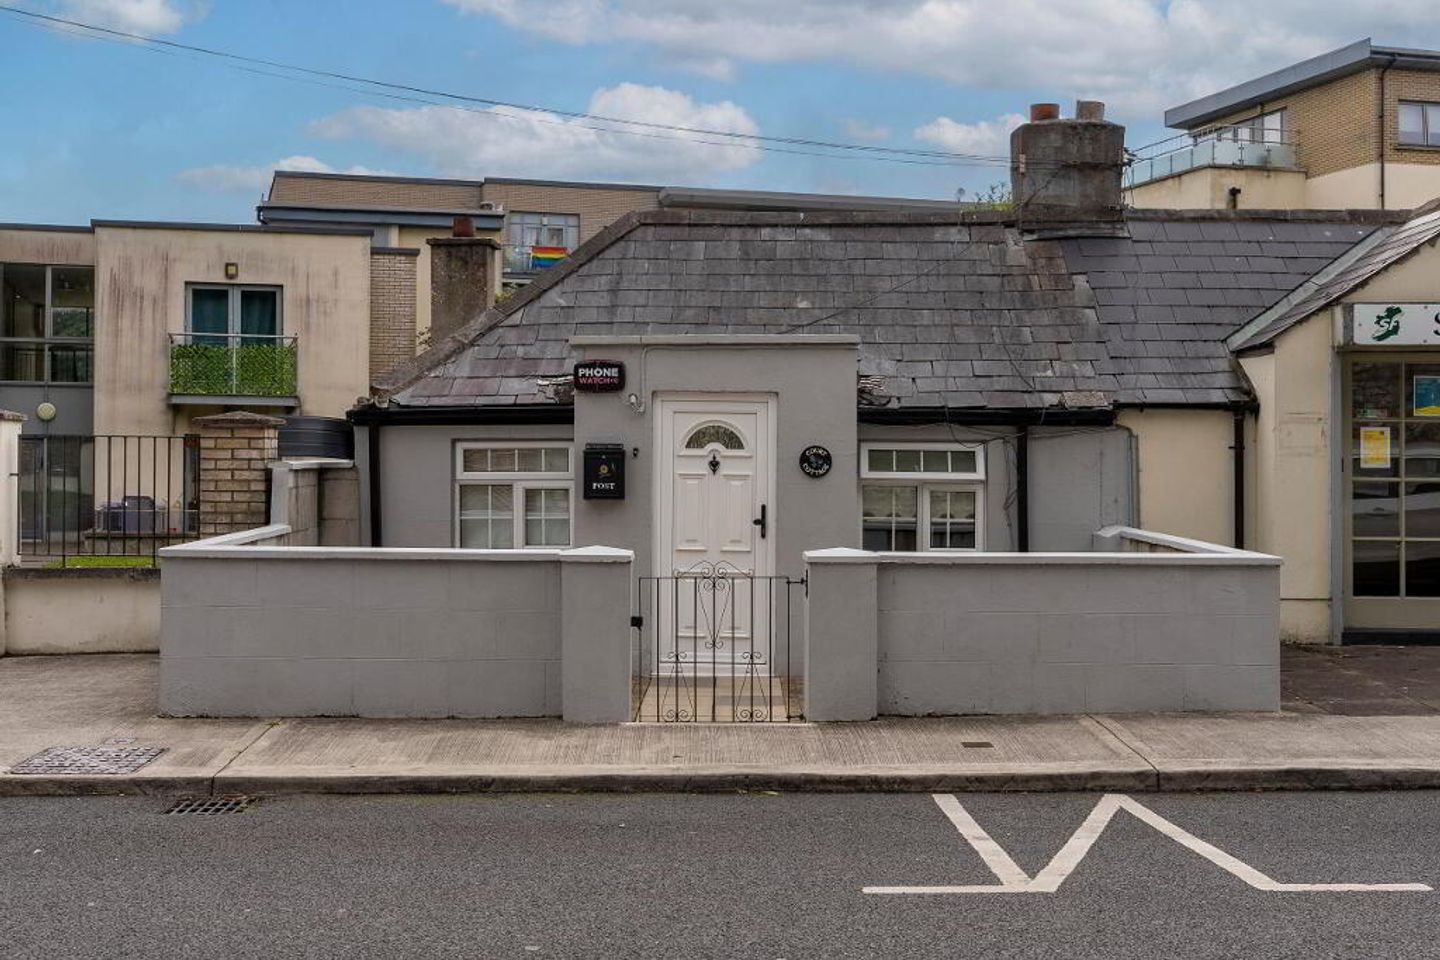 Court Cottage Greenhills Road, Tallaght, Dublin 24, D24VPY5